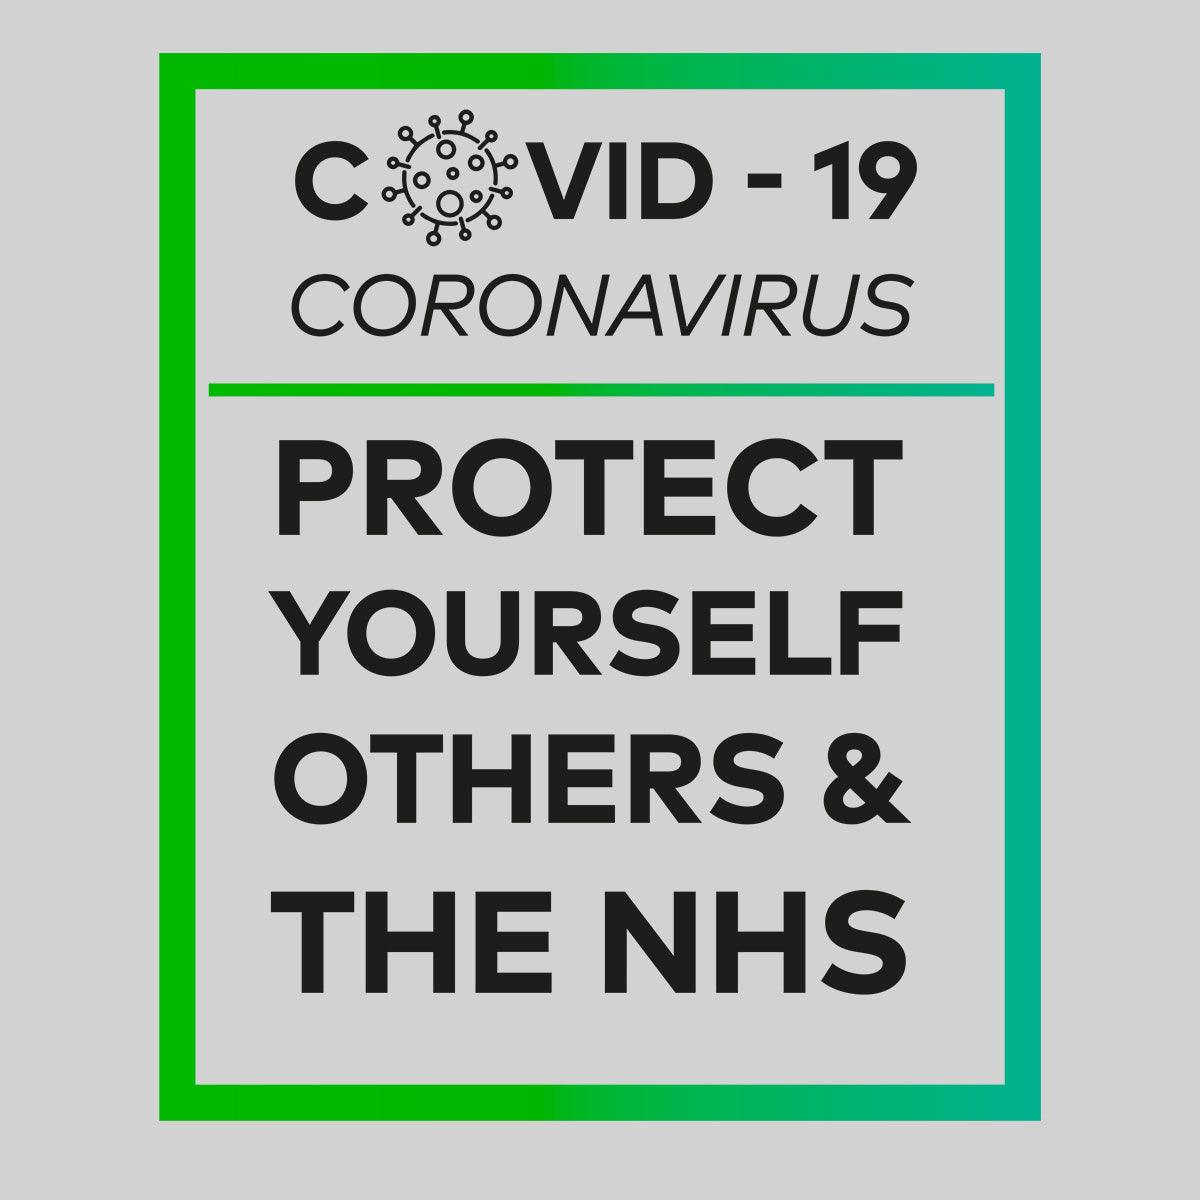 Covid19 Protect yourself others and the NHS - Black White & Black T-shirt - Kuzi Tees